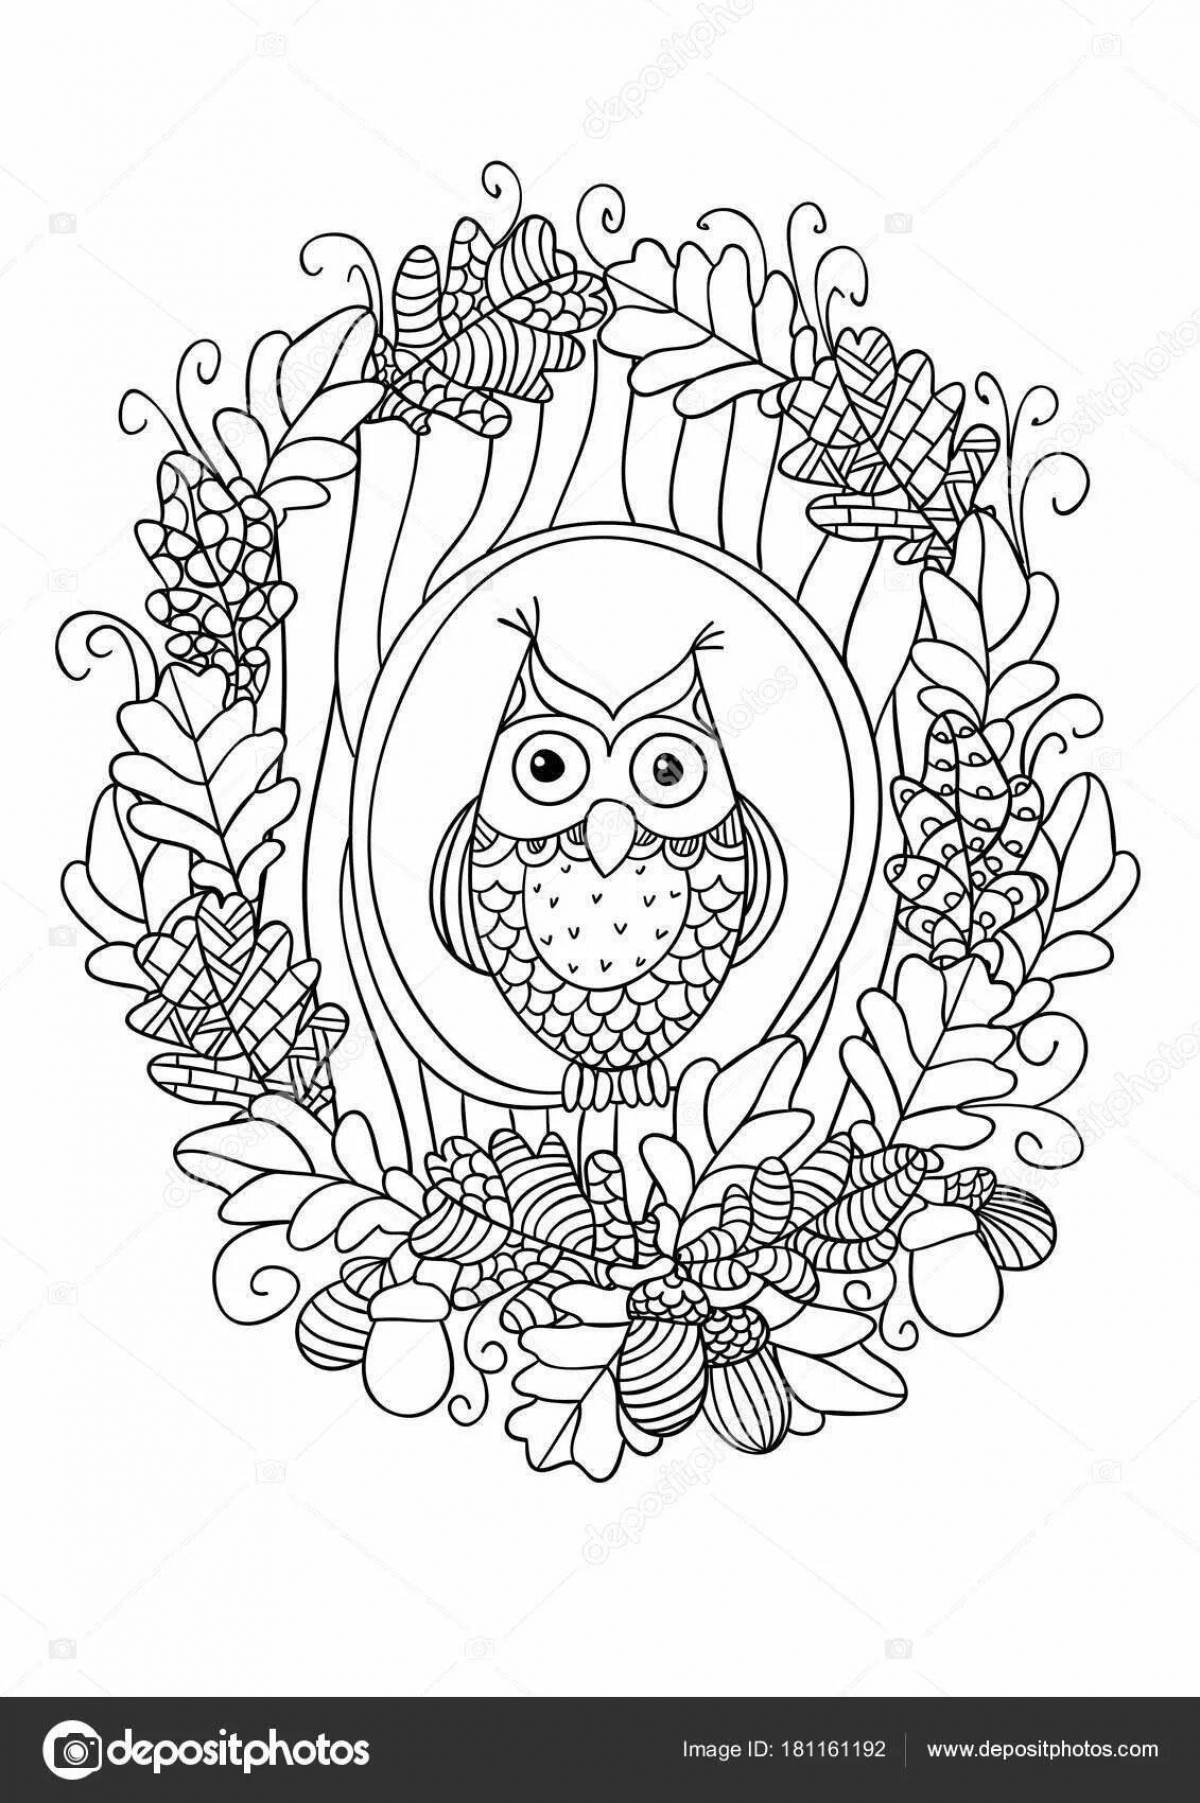 Bianca owl coloring page